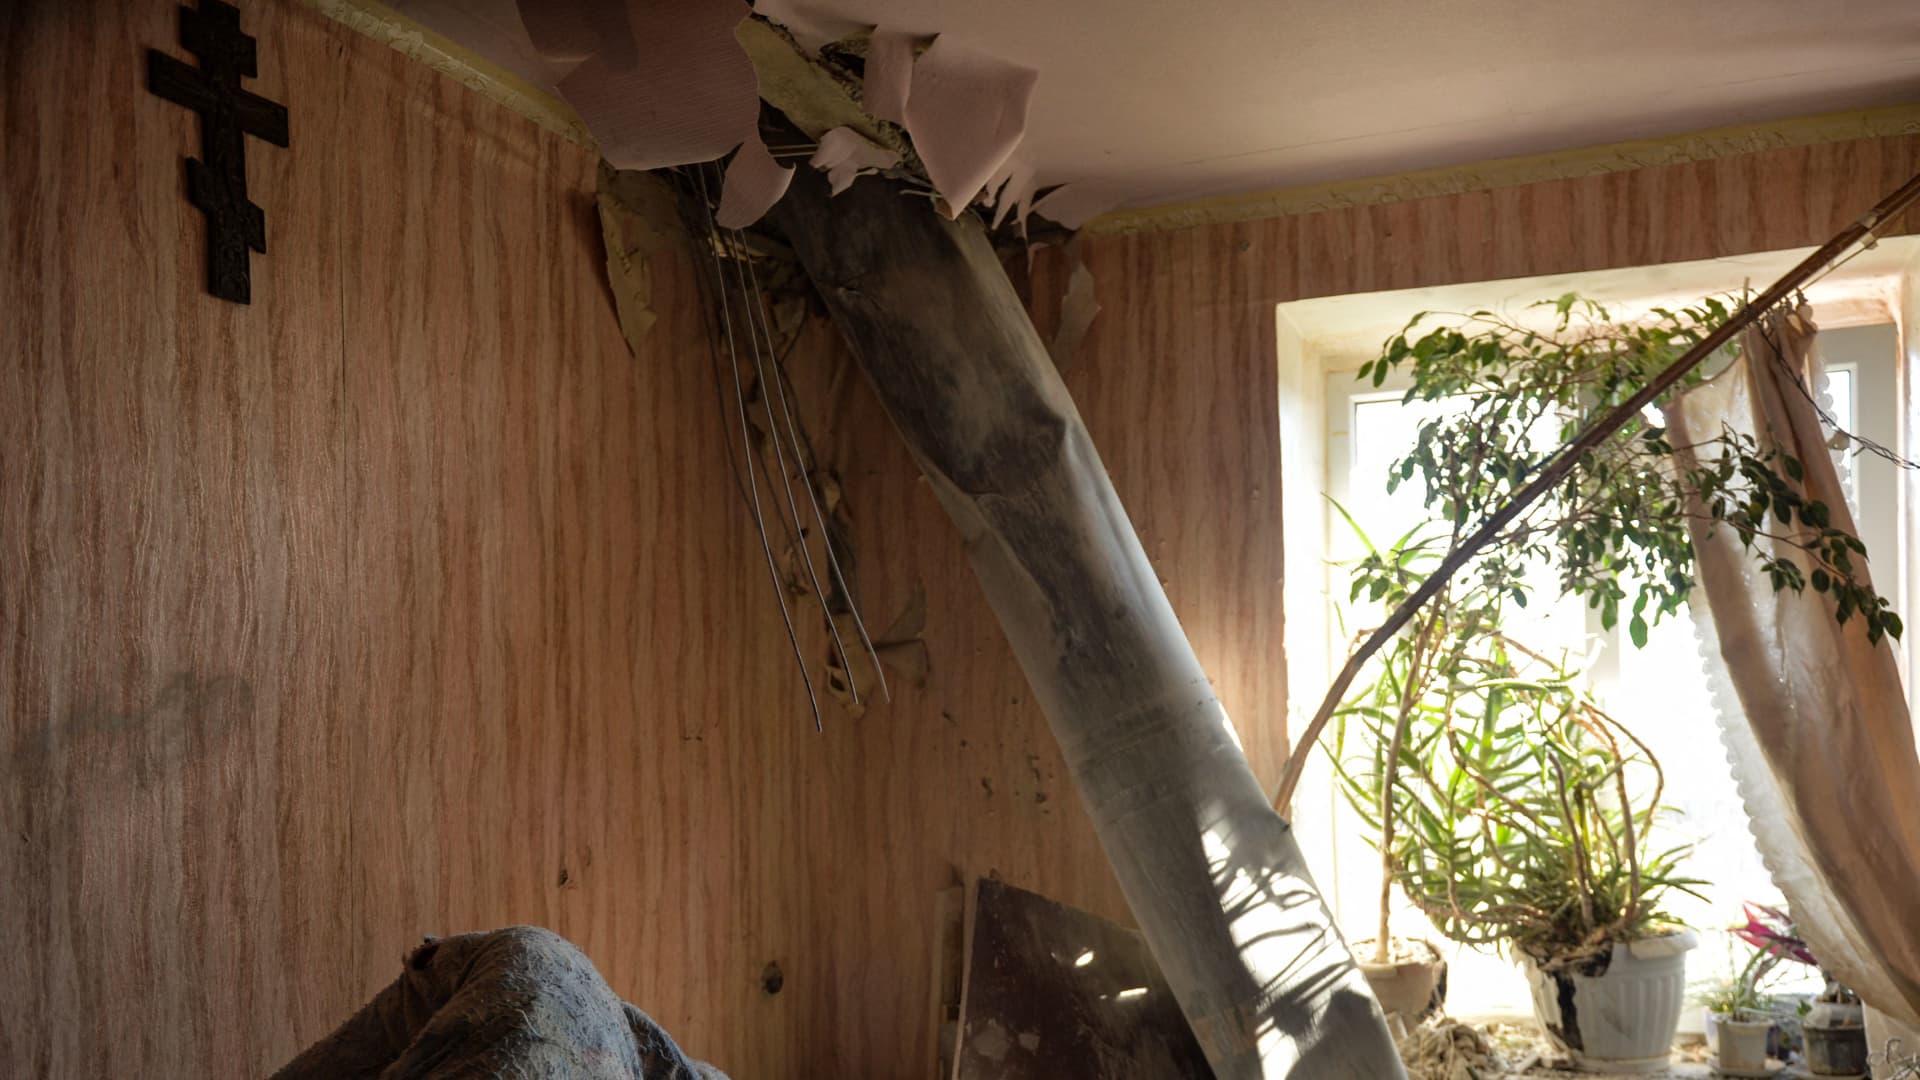 The body of a rocket stuck in a flat after recent shelling on the northern outskirts of Kharkiv on February 24, 2022.